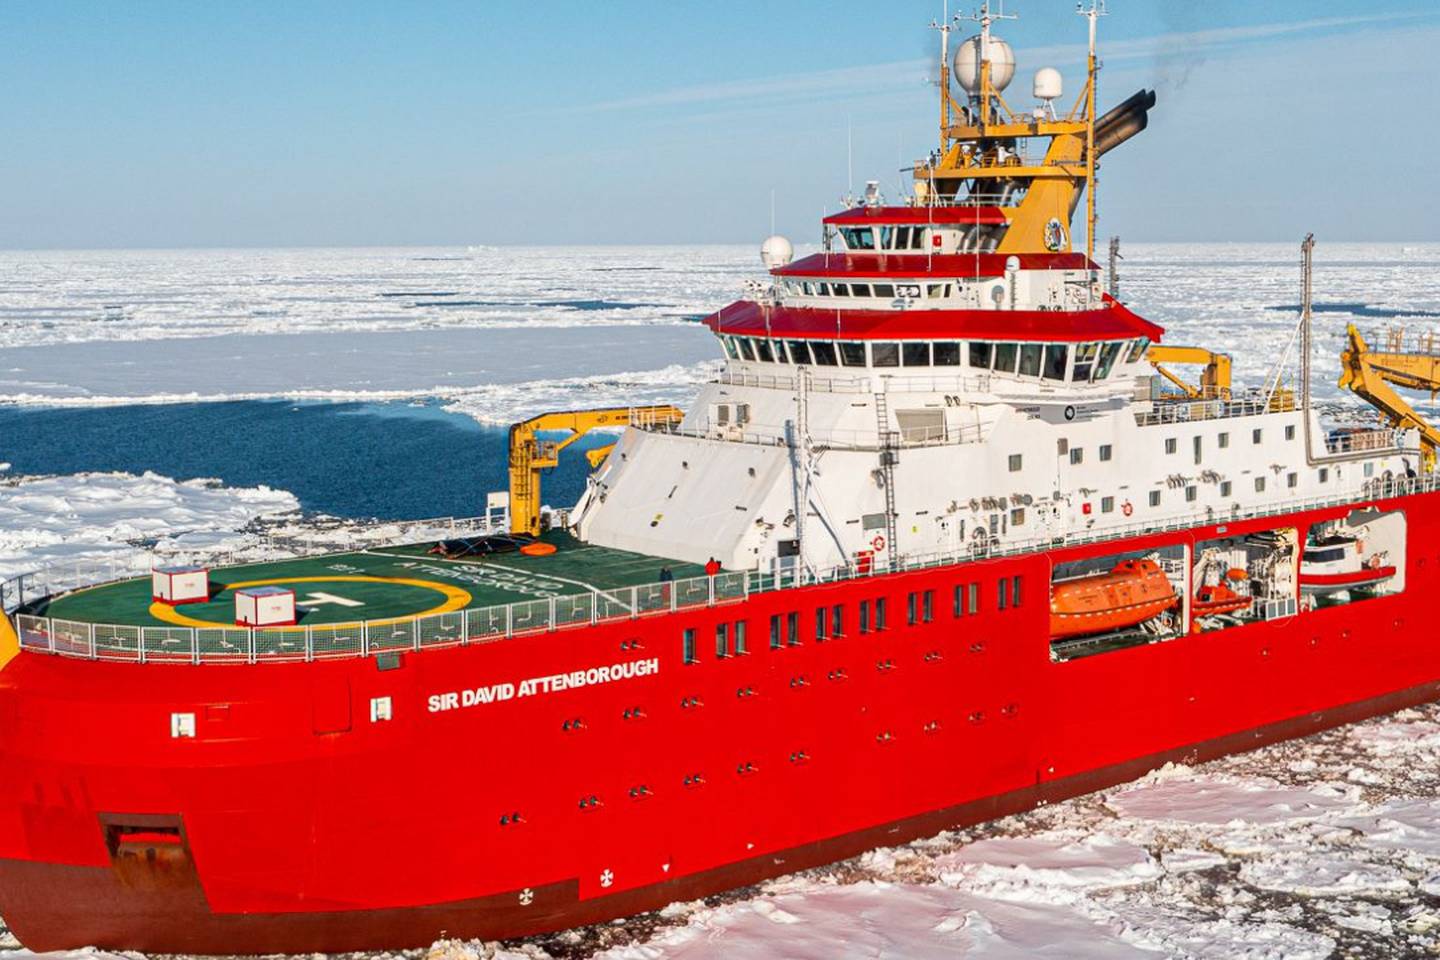 Take a look inside the UK's floating polar research laboratory